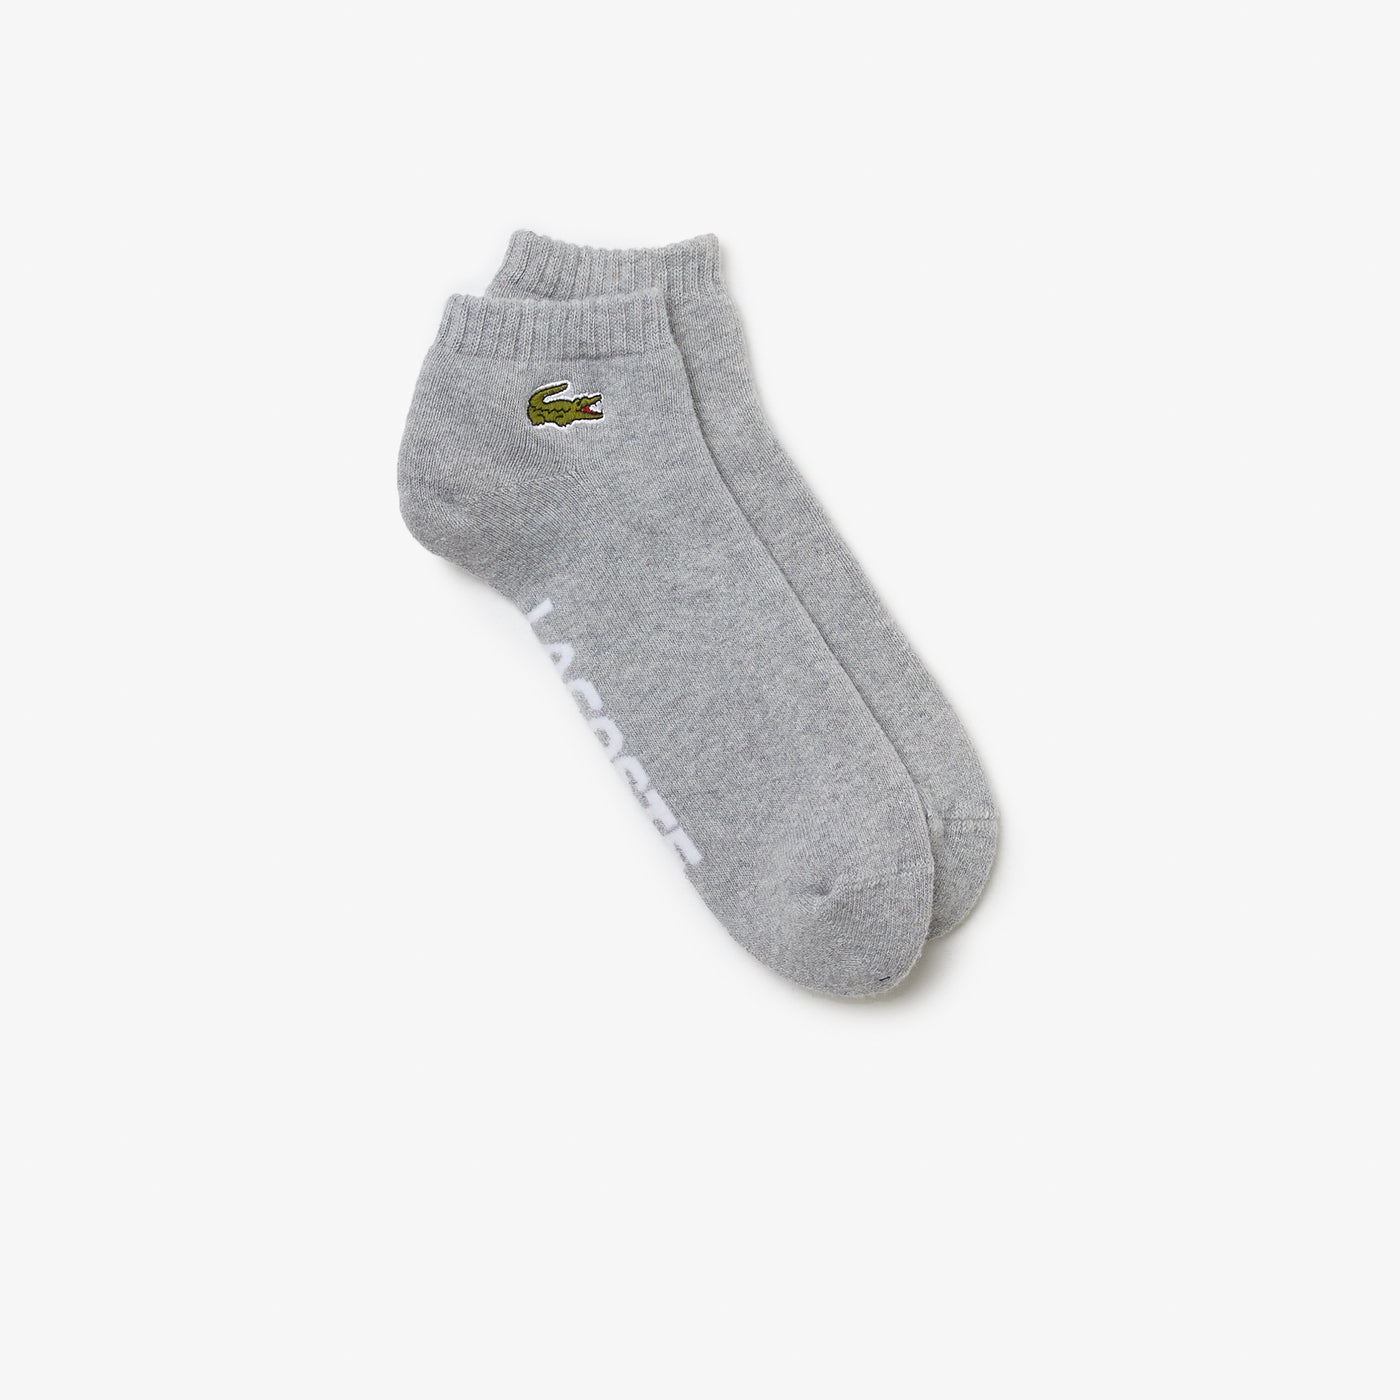 Shop The Latest Collection Of Lacoste Unisex Lacoste Sport Branded Stretch Cotton Low-Cut Socks - Ra4184 In Lebanon